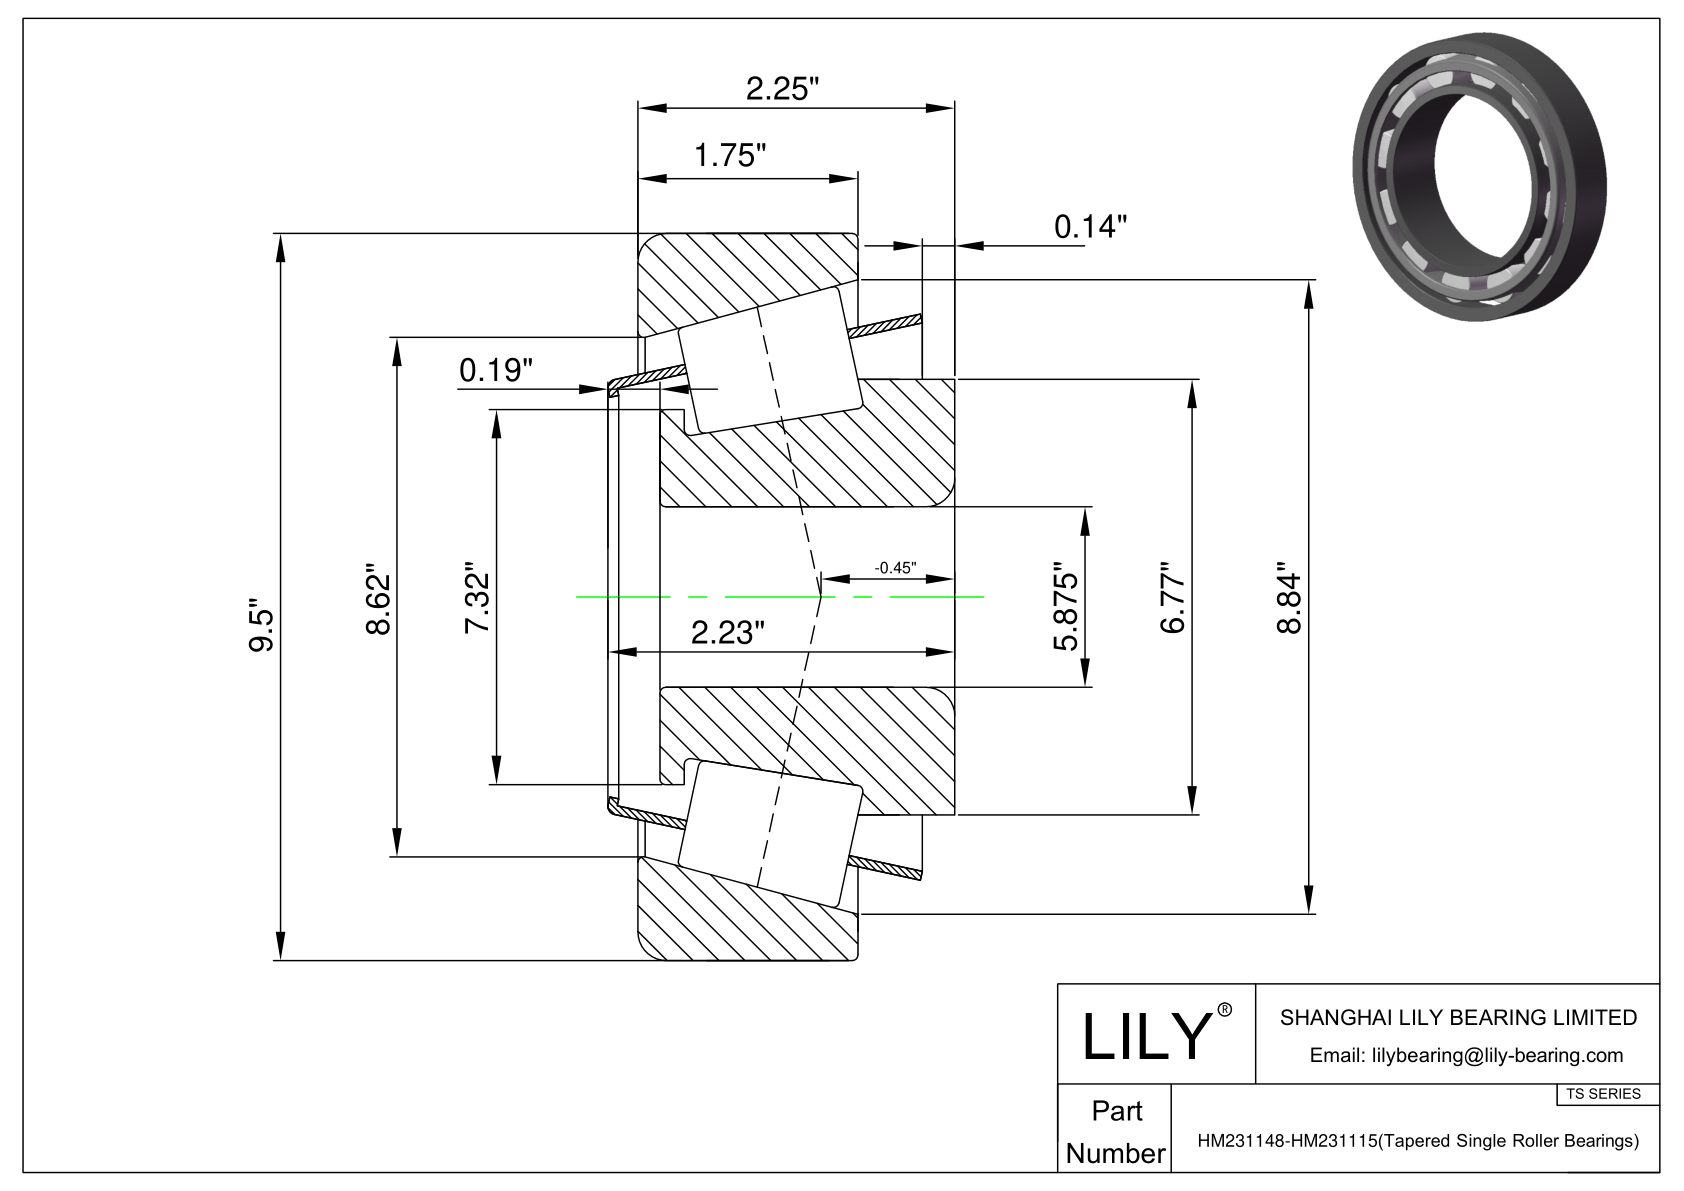 HM231148-HM231115 TS (Tapered Single Roller Bearings) (Imperial) cad drawing